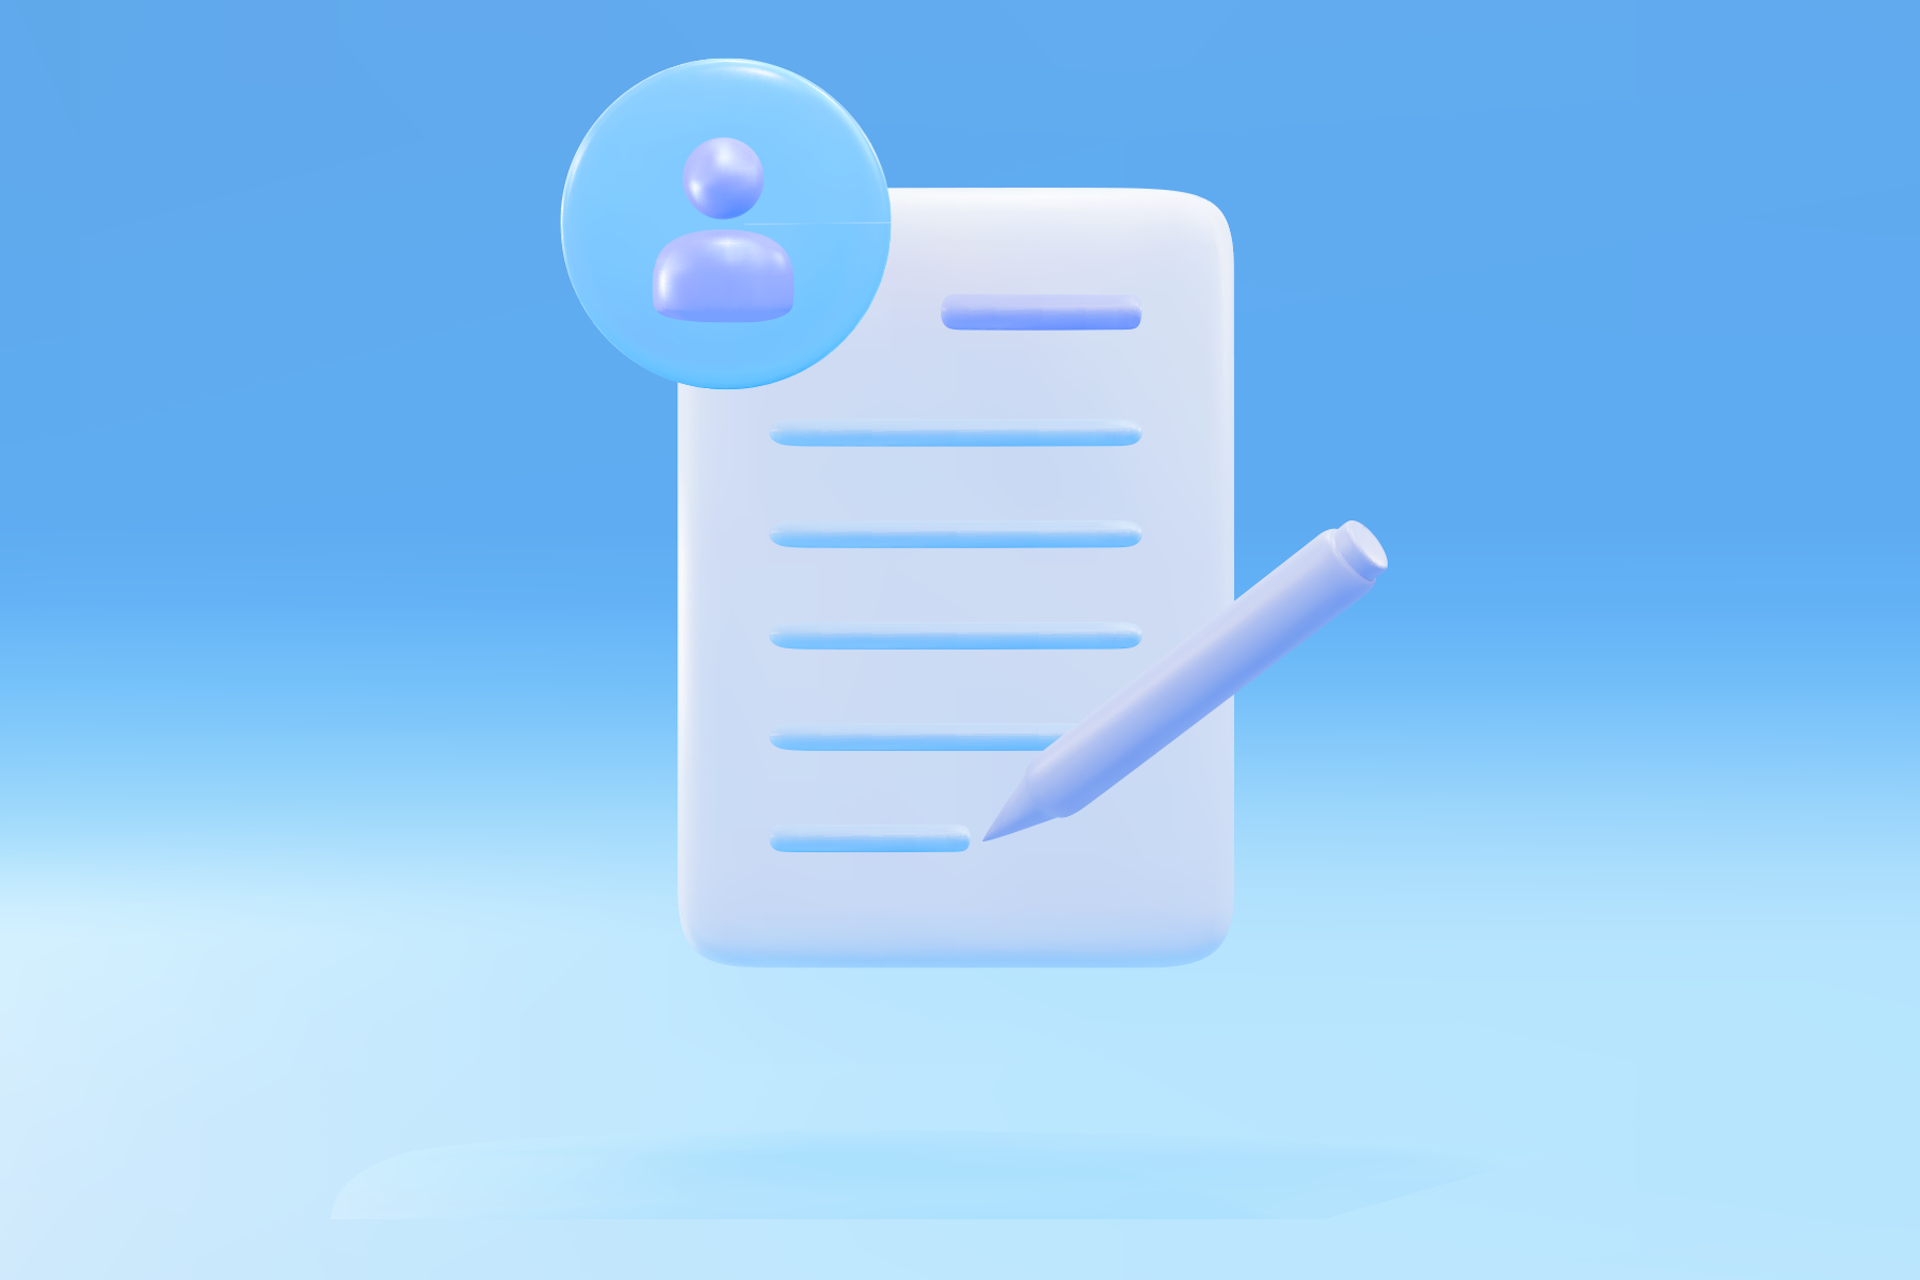 Illustration of a contract with a floating profile image icon and a pen. Influencer contract template download